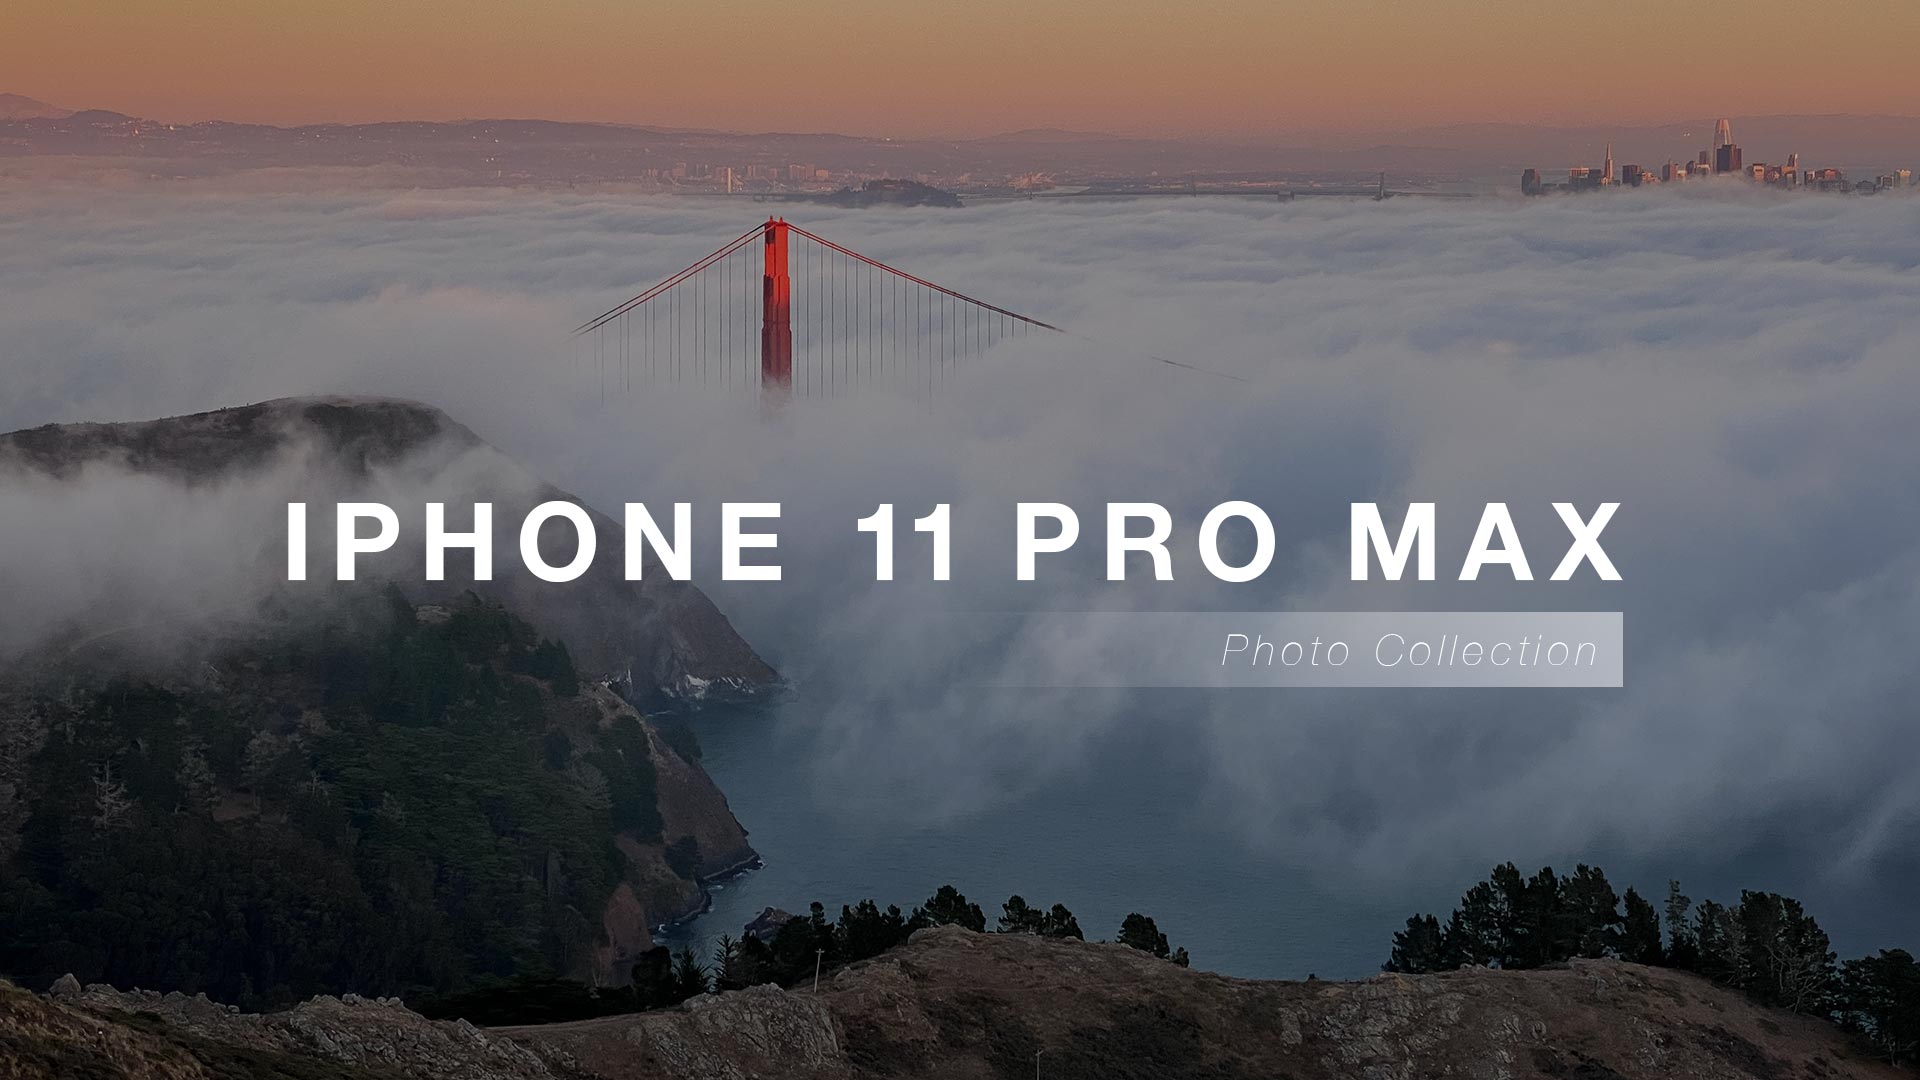 iPhone 11 Pro Max – Photography